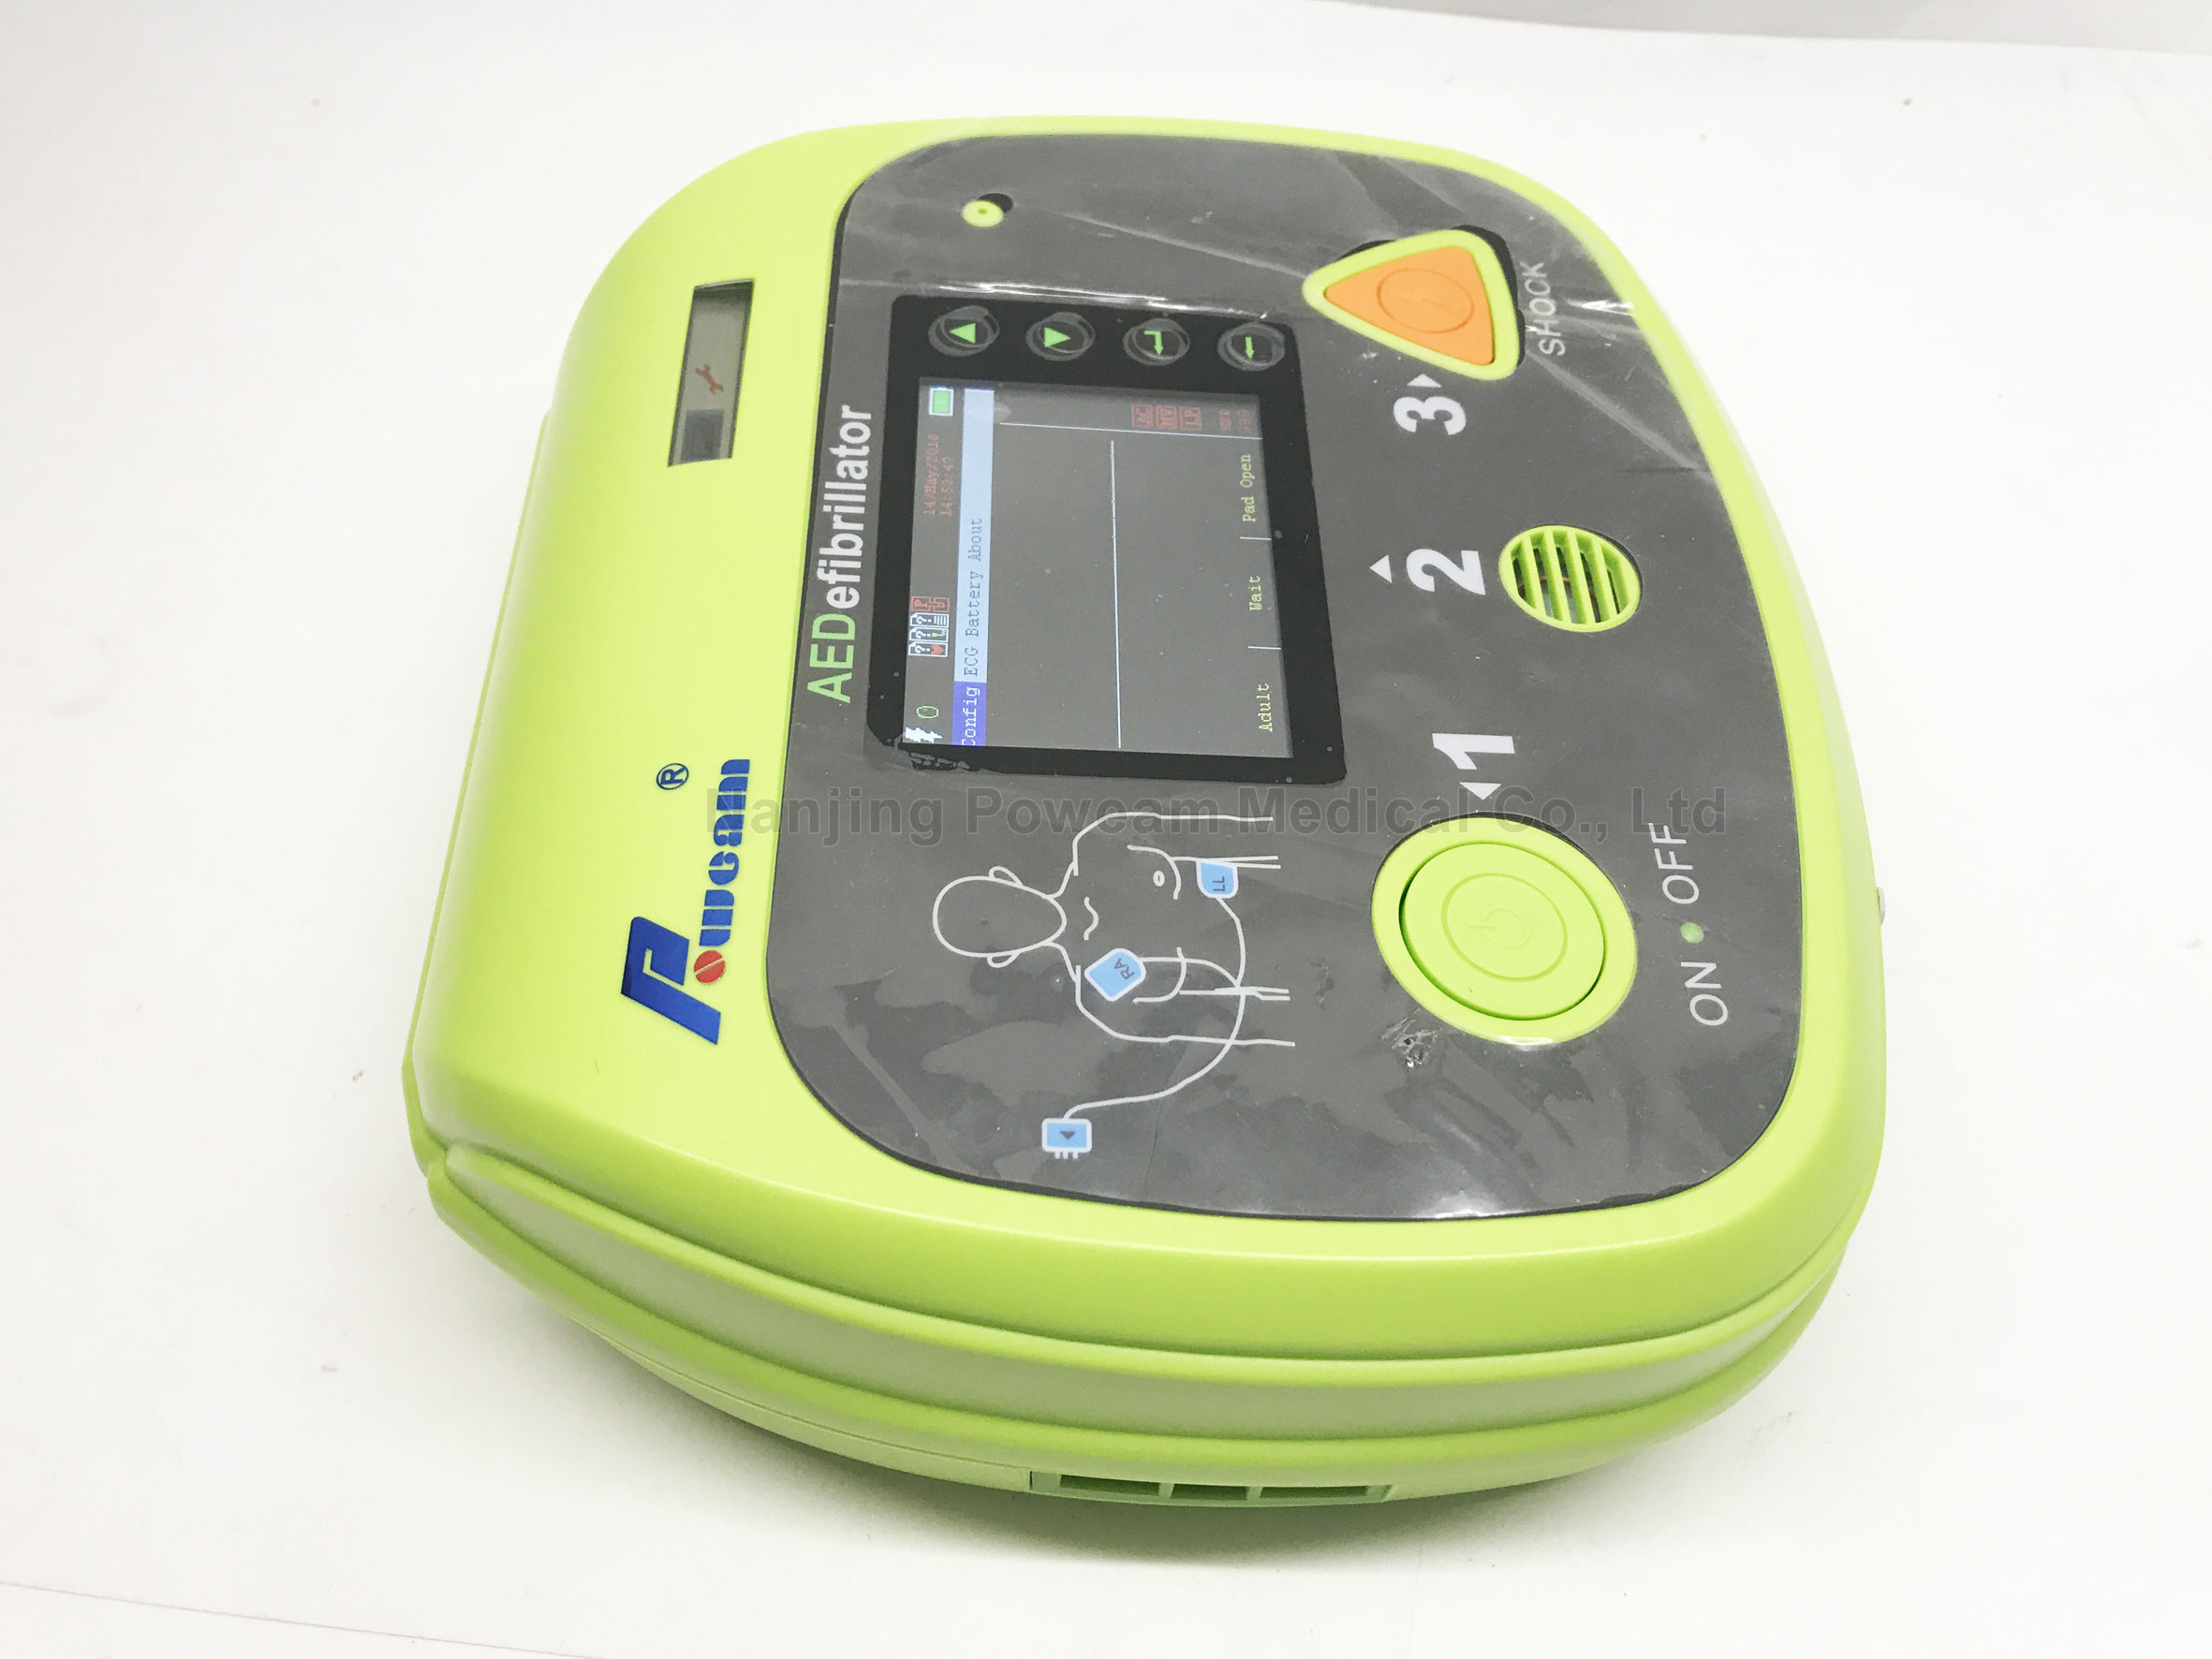 Aed Defibrillator Aed7000 Plus with Color LCD Screen